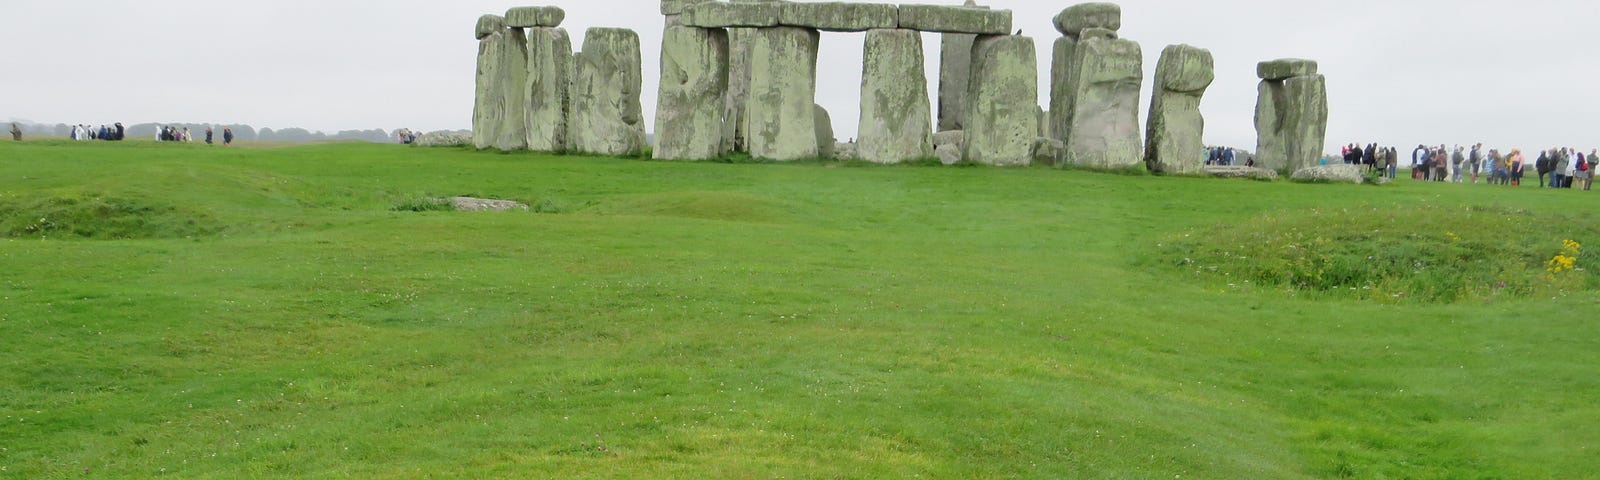 Stonehenge showing the processional Stonehenge Avenue (forground) and the enclosure ditch mid either side.